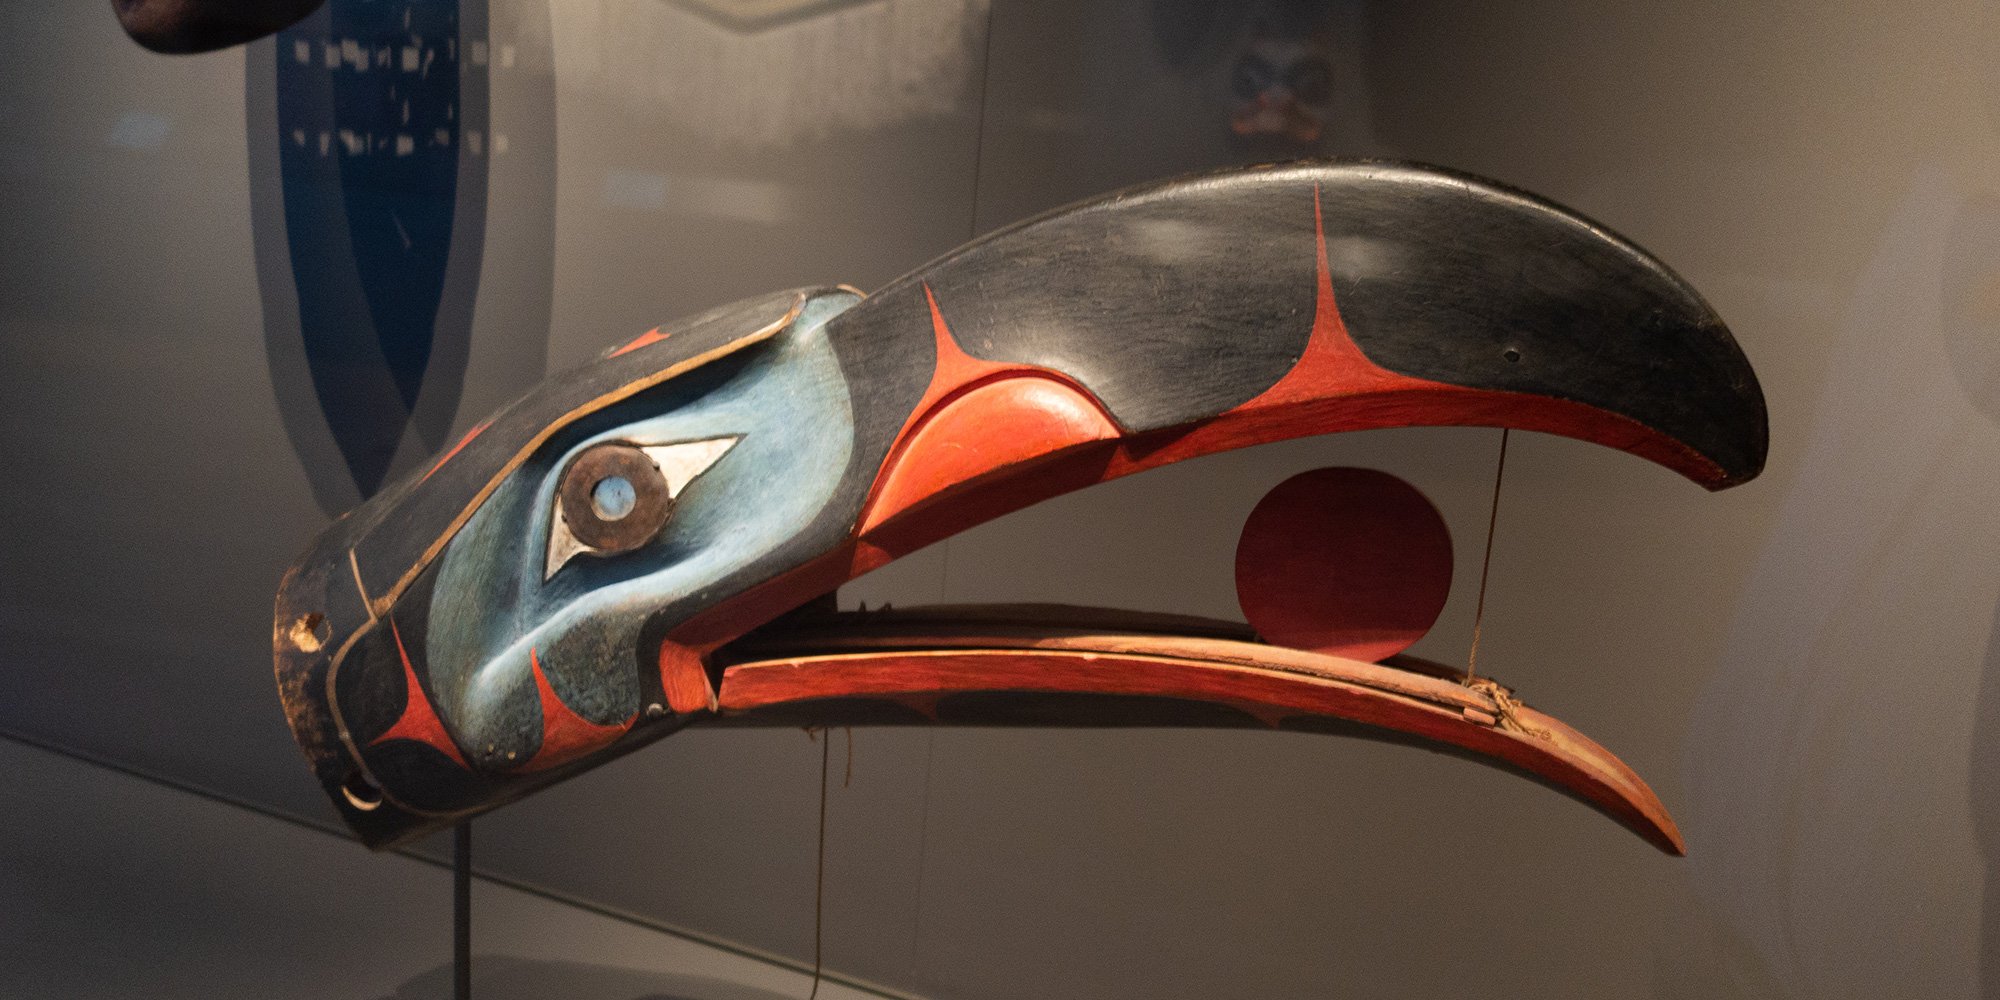 Indigenous Repatriation - Indigenous Peoples and Museums